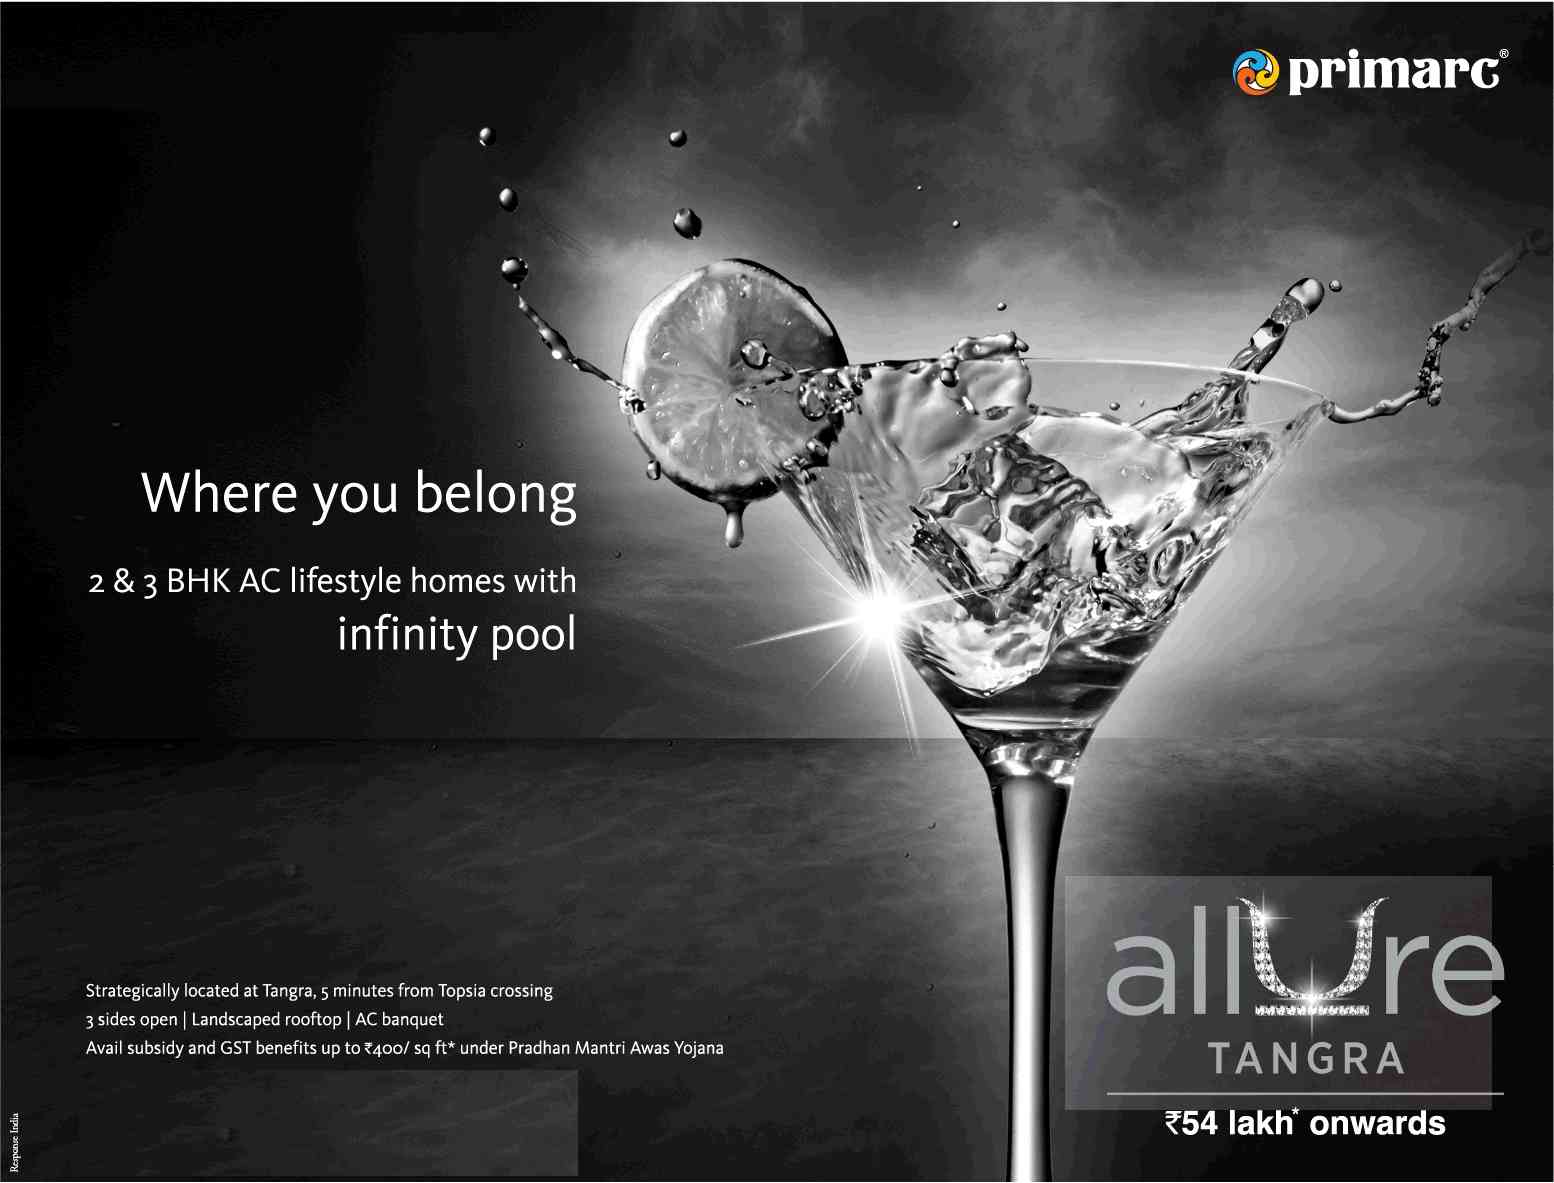 Book 2 & 3 BHK AC lifestyle homes starting at Rs. 54 Lakhs onwards at Primarc Allure in Kolkata Update